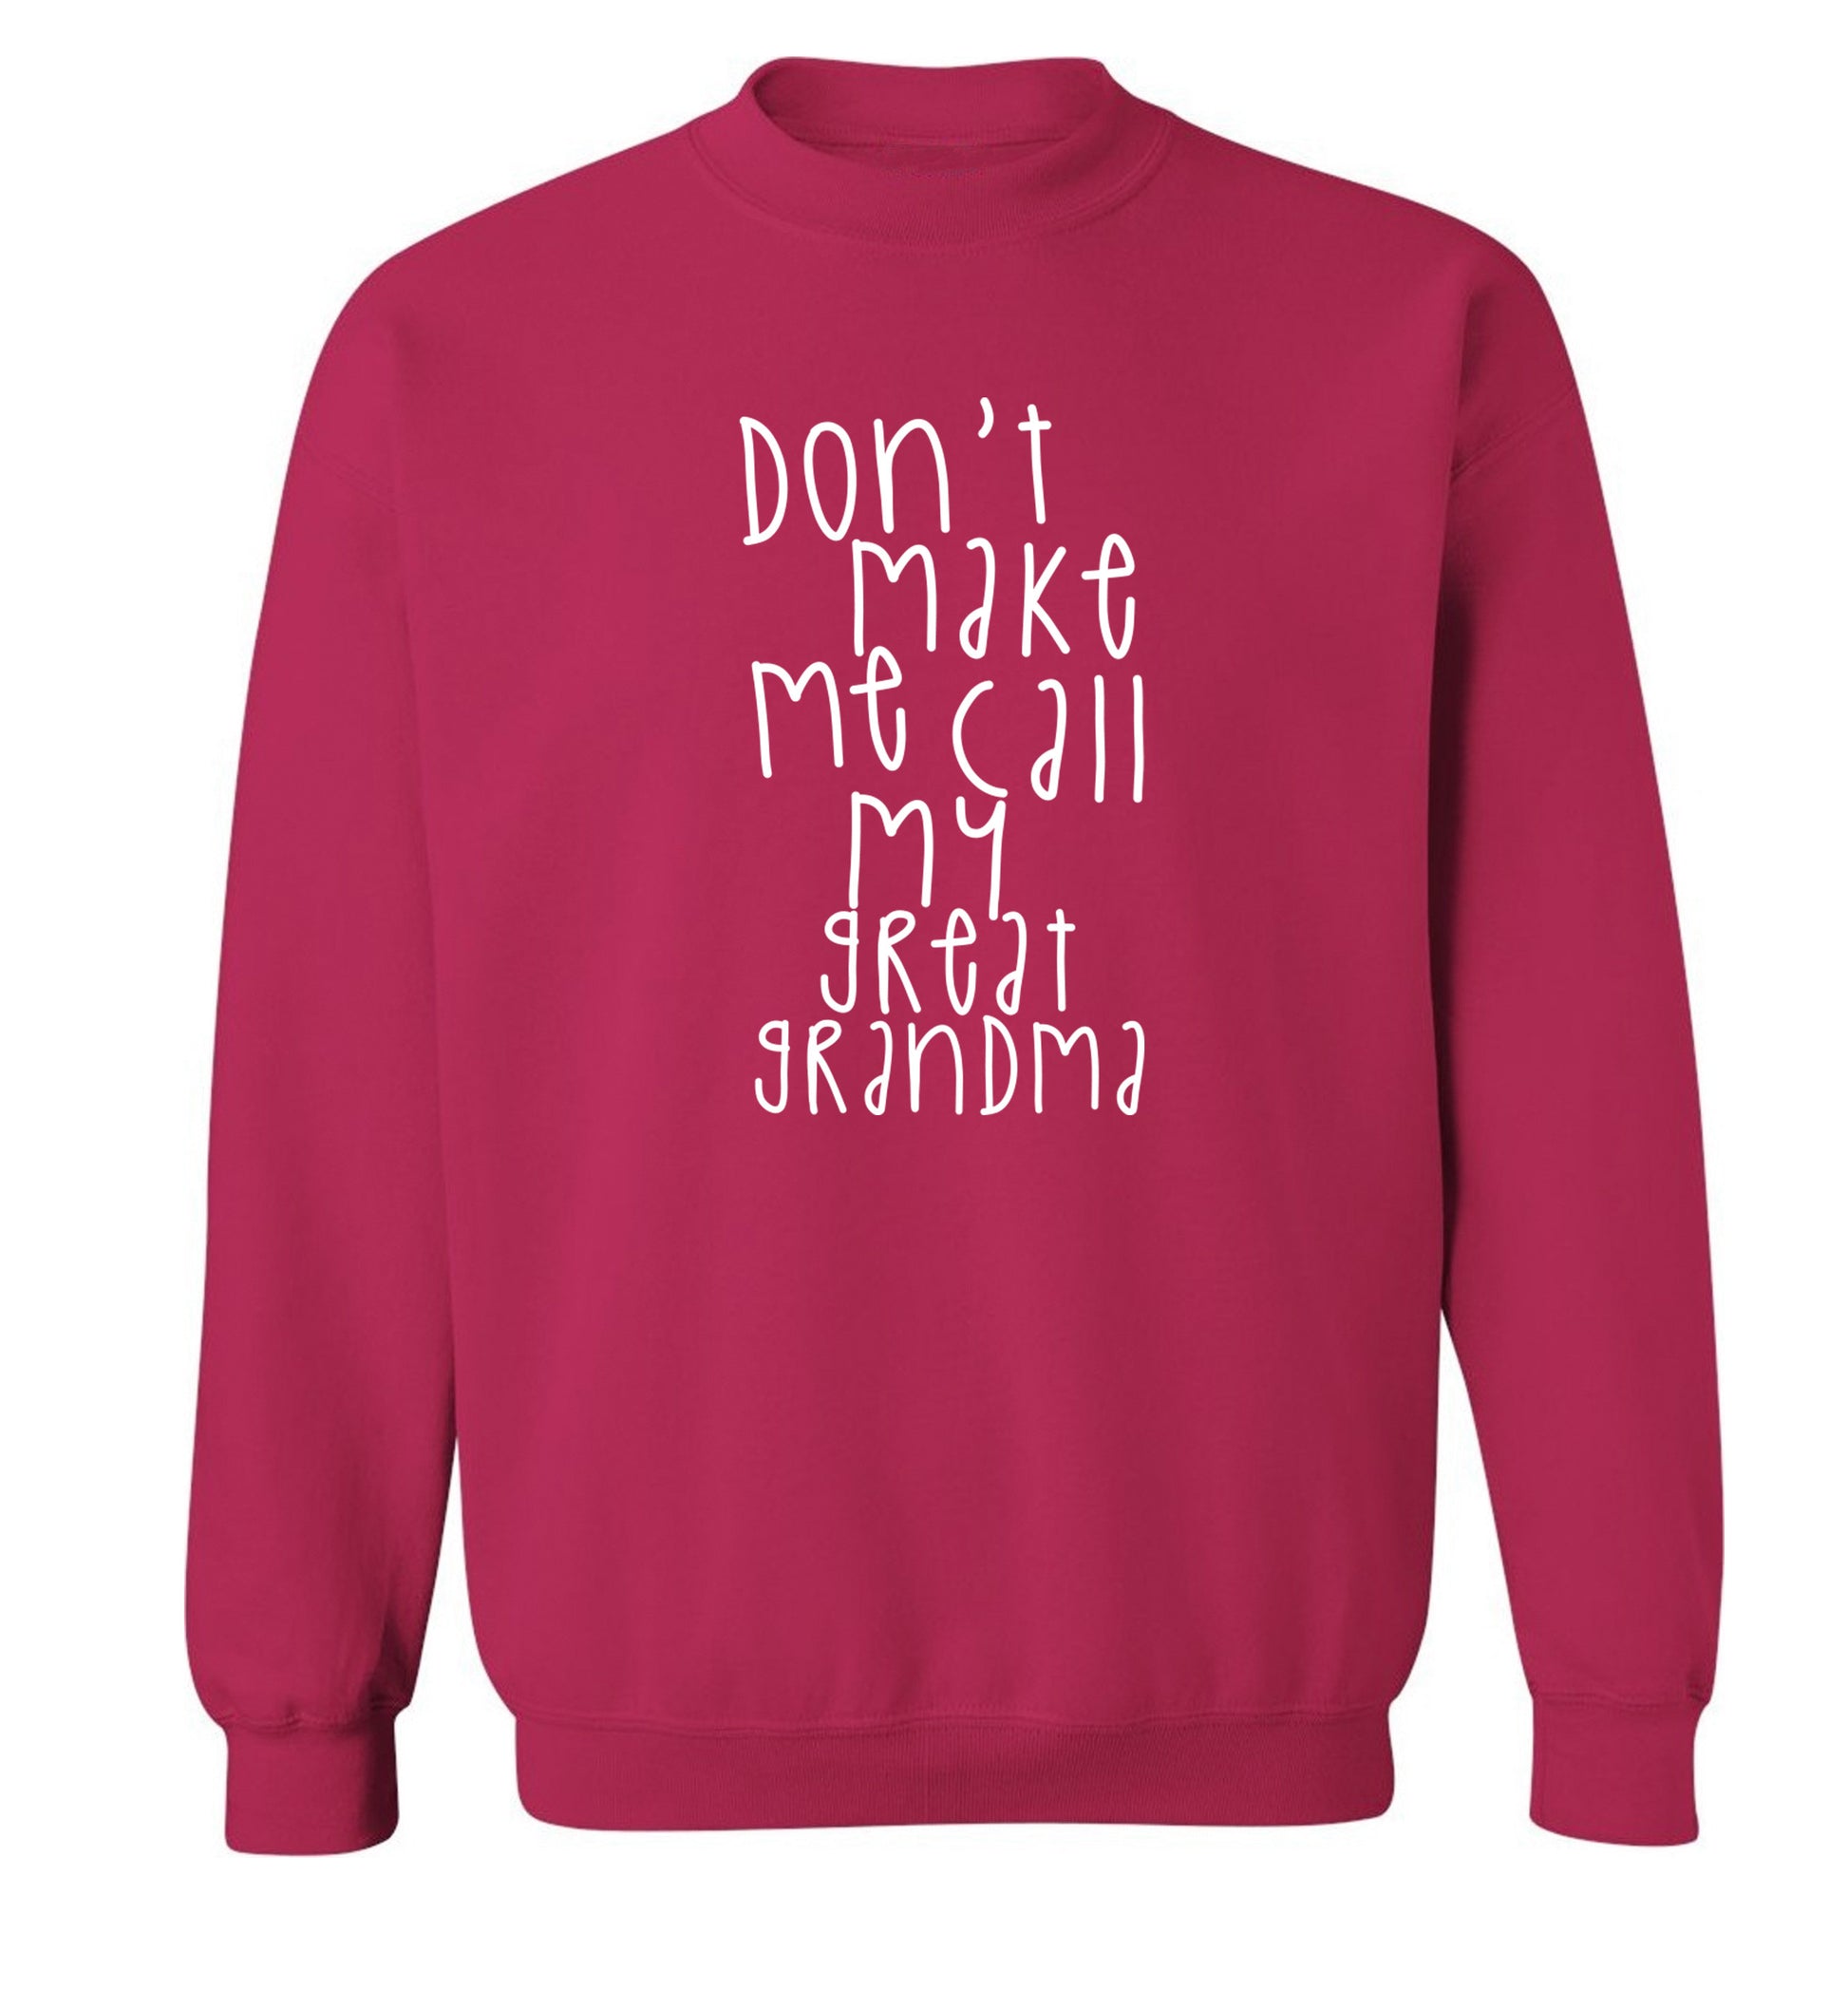 Don't make me call my great grandma Adult's unisex pink Sweater 2XL